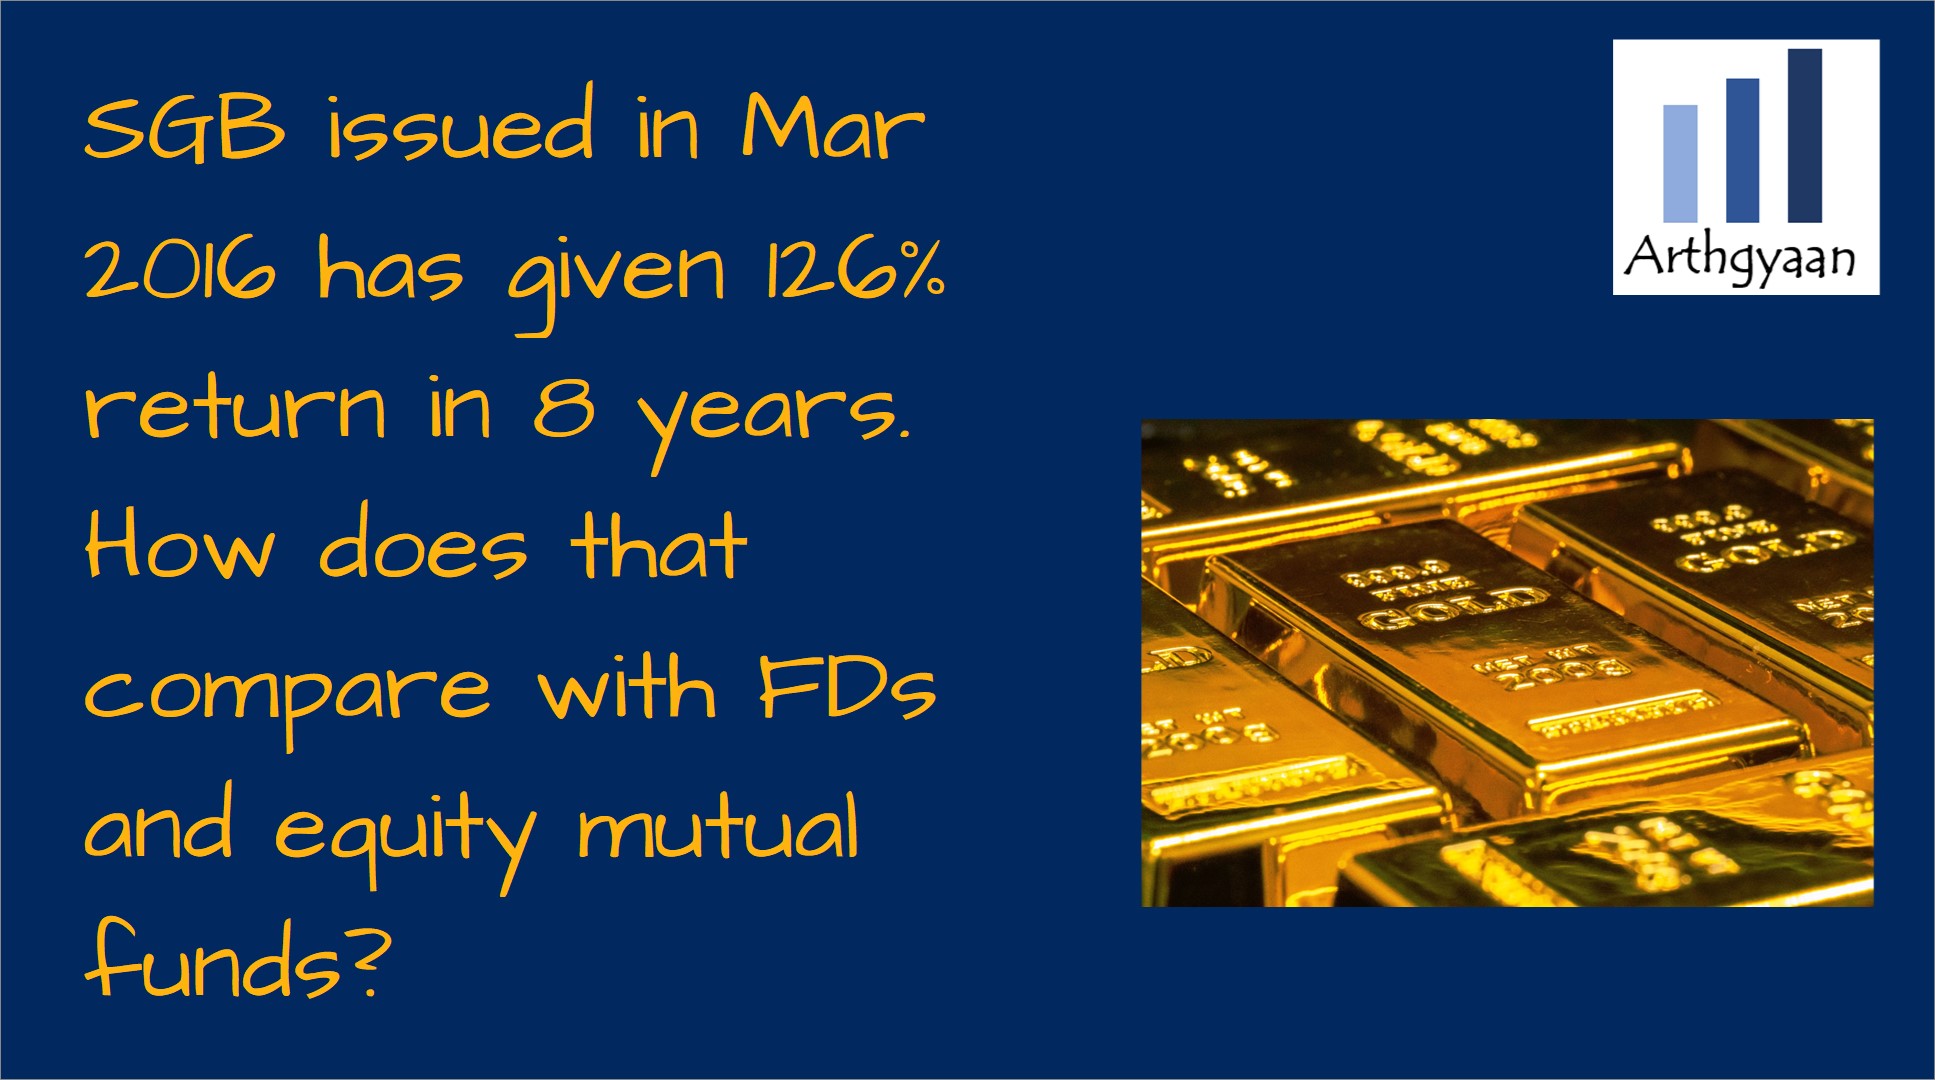 SGB issued in Mar 2016 has given 126% return in 8 years. How does that compare with FDs and equity mutual funds?